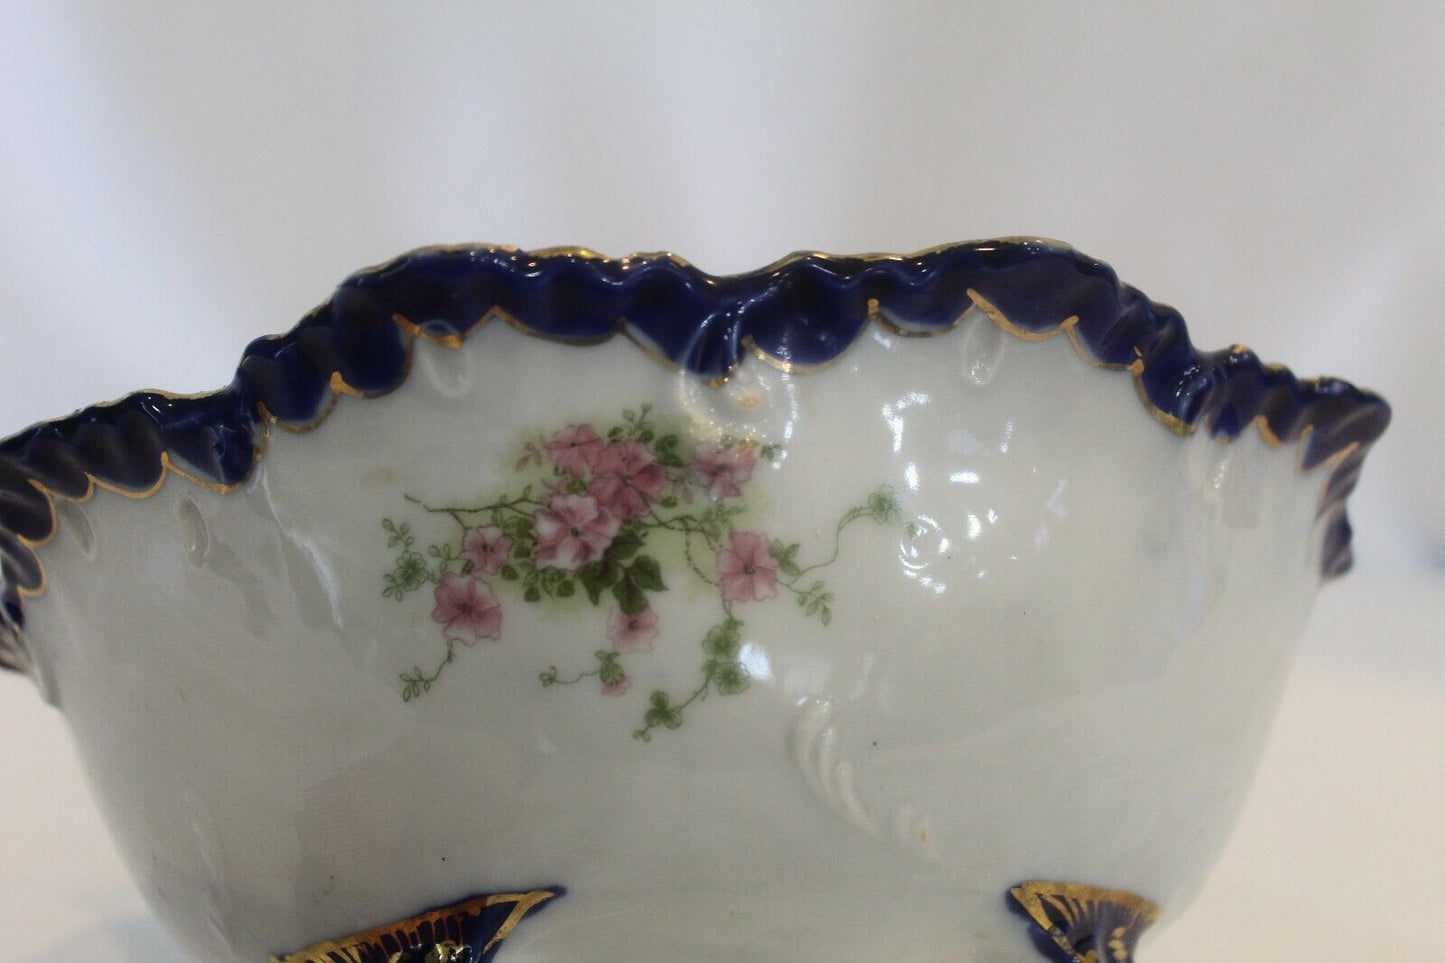 Nagoya SNB Nippon Hand Painted Porcelain Footed Bowl  Gold Painted "STUNNING"